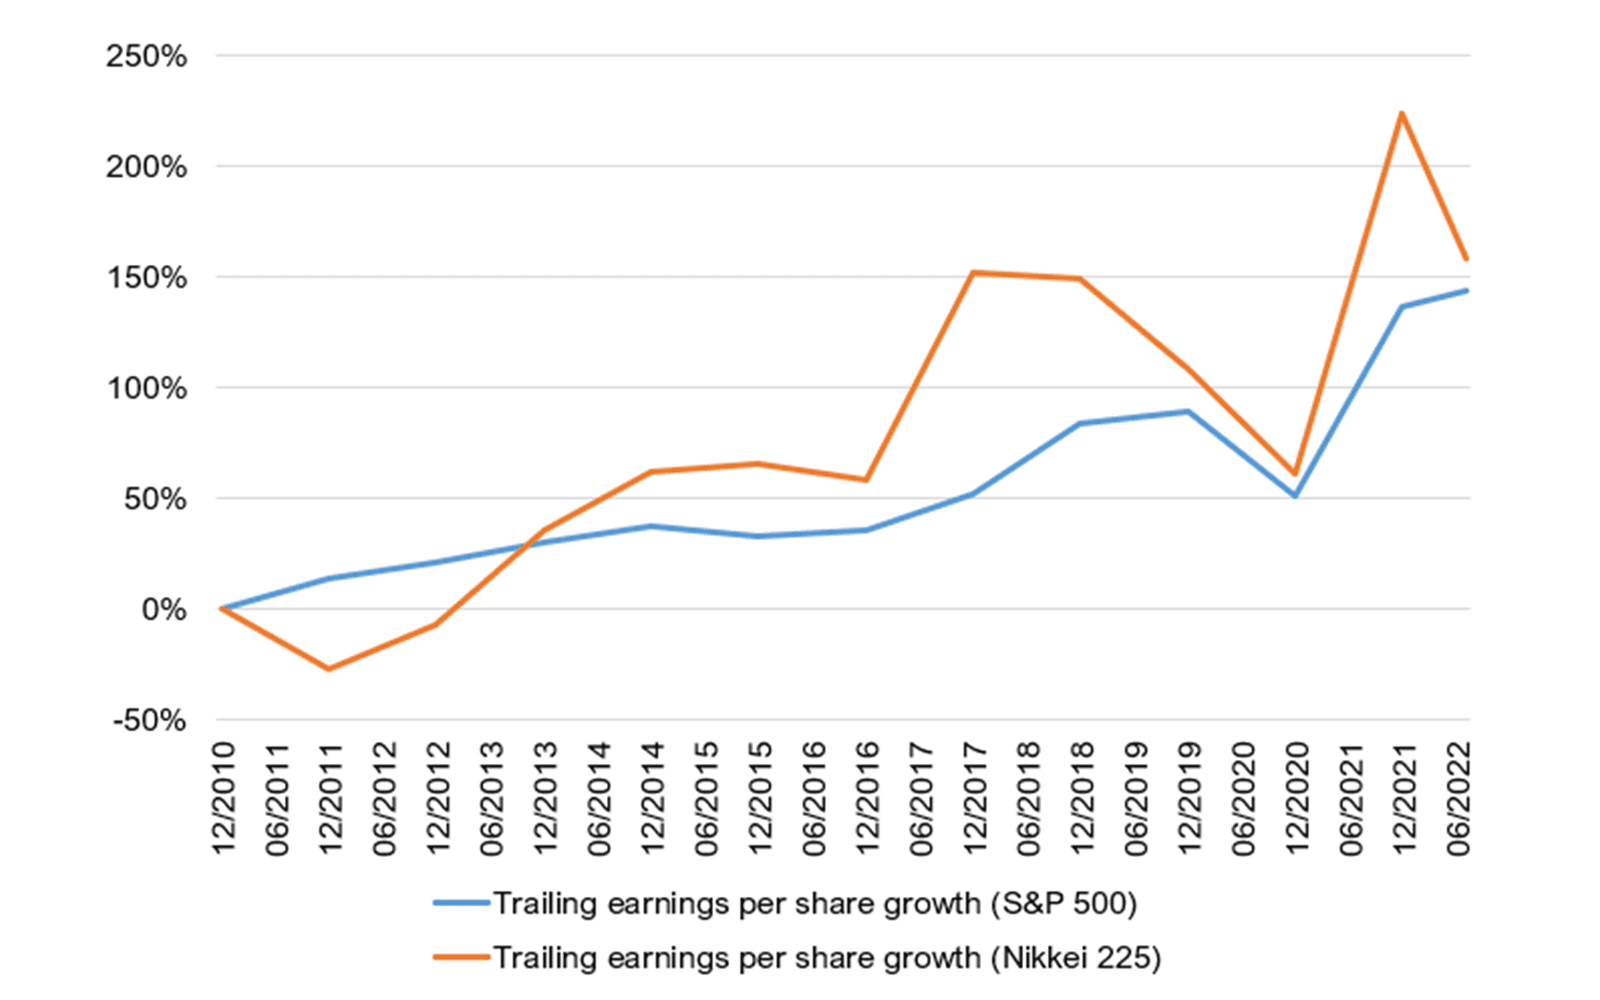 Earnings per share growth (trailing) of companies in the S&P 500 and the Nikkei 225. Data from Bloomberg.